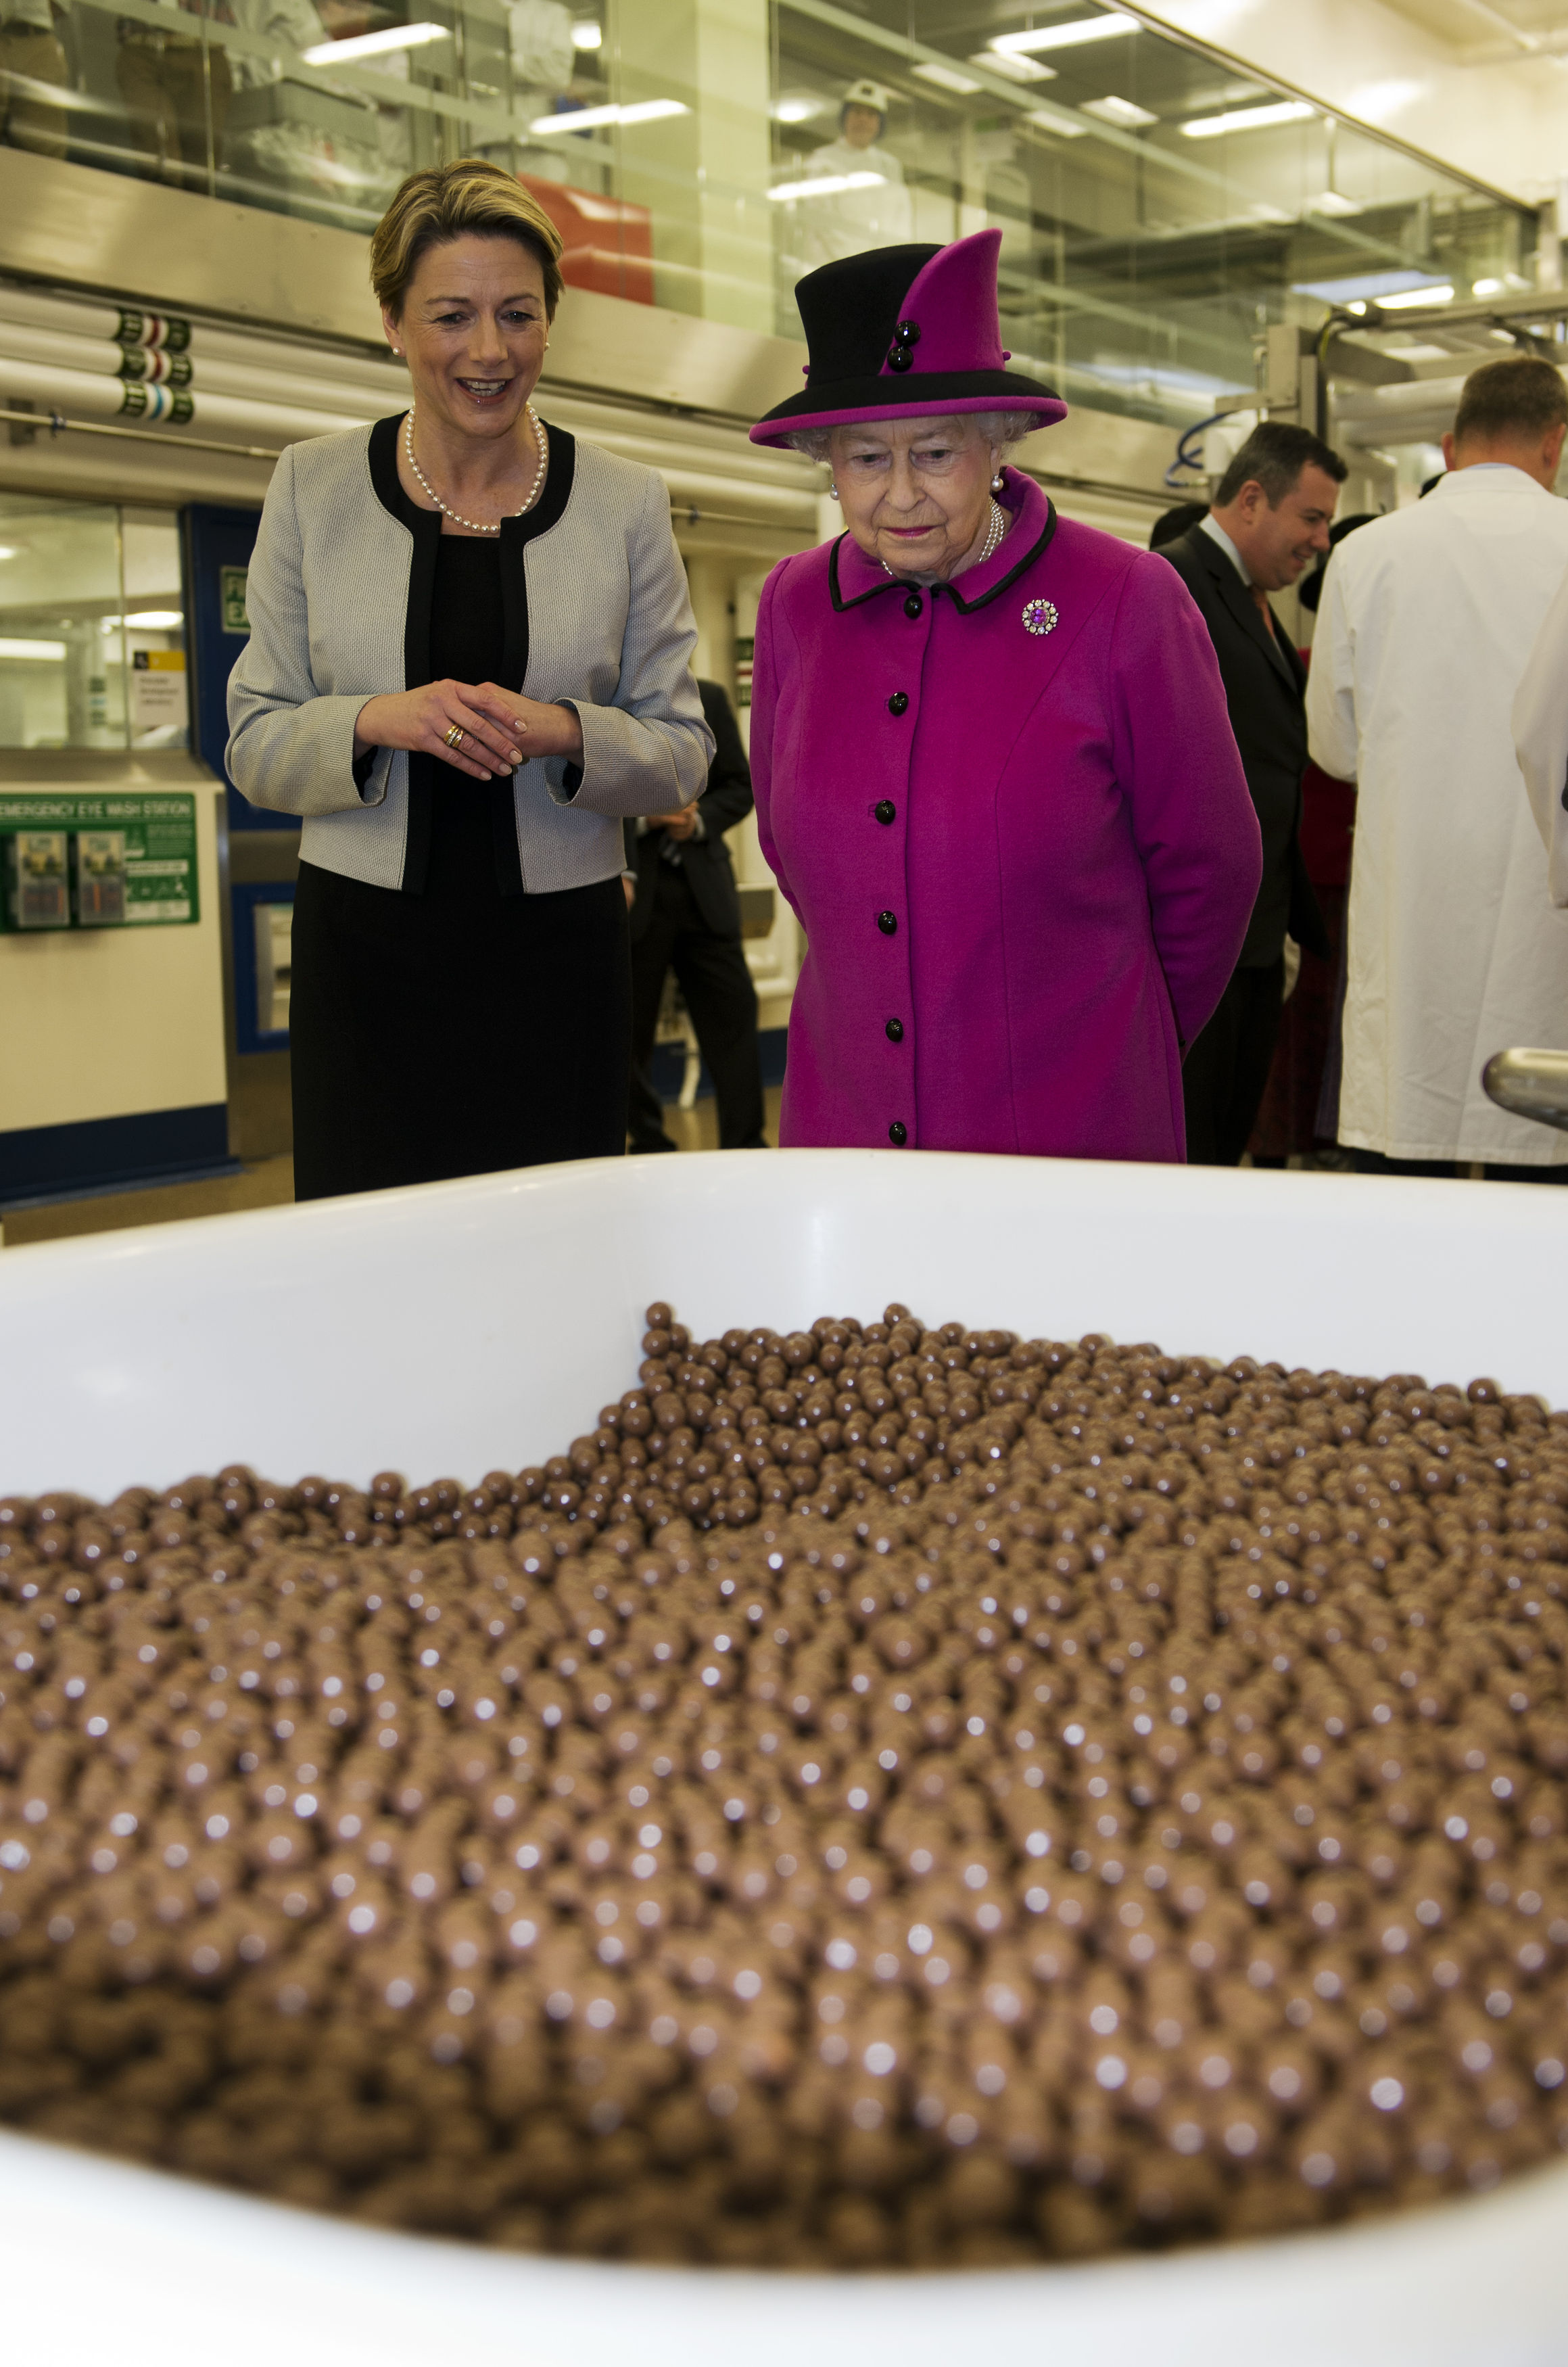 The Queen at the Mars factory